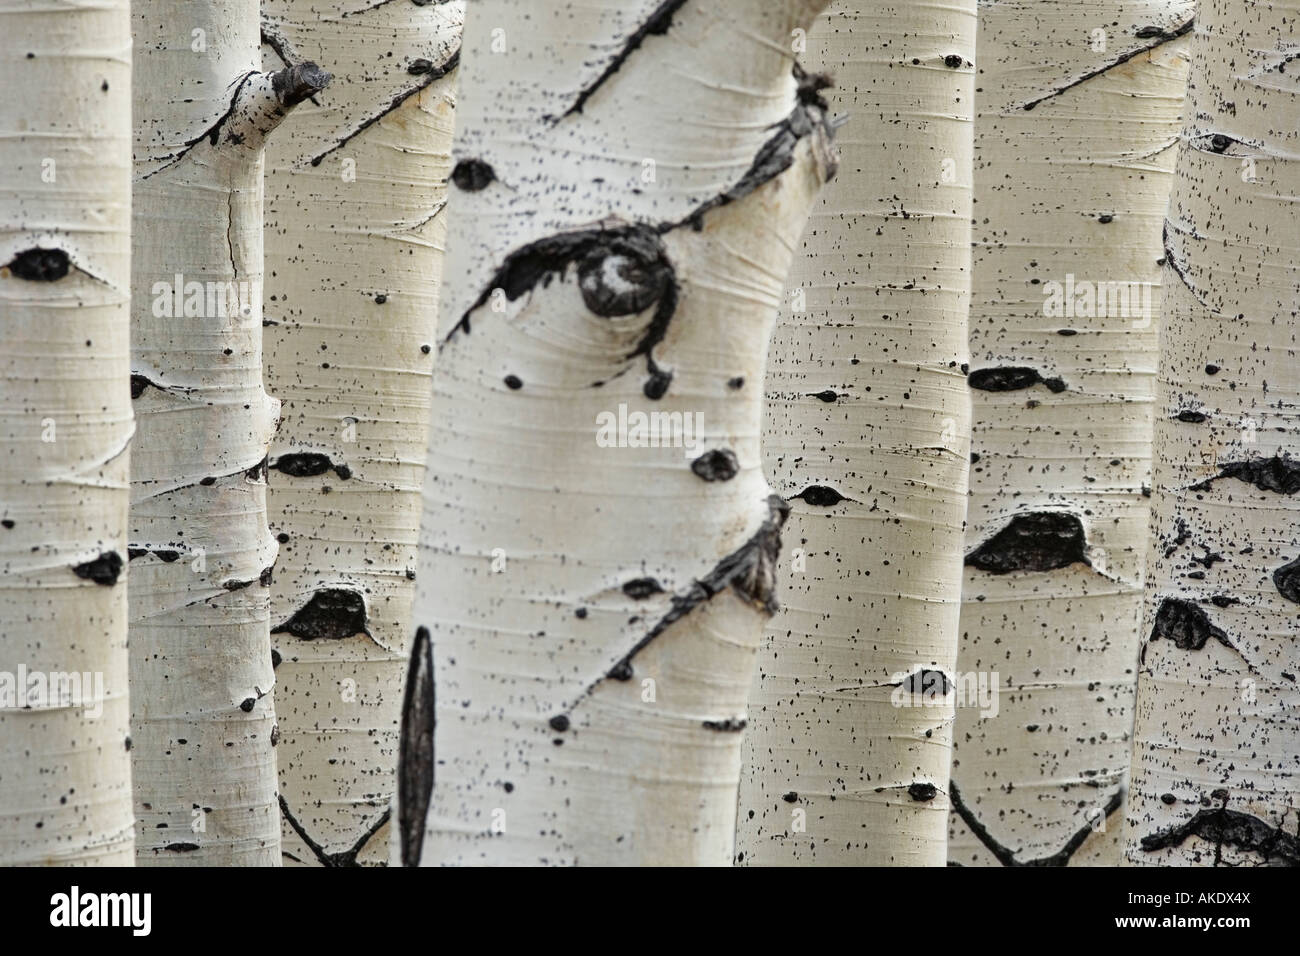 Birch trees in a row, close-up of trunks Stock Photo